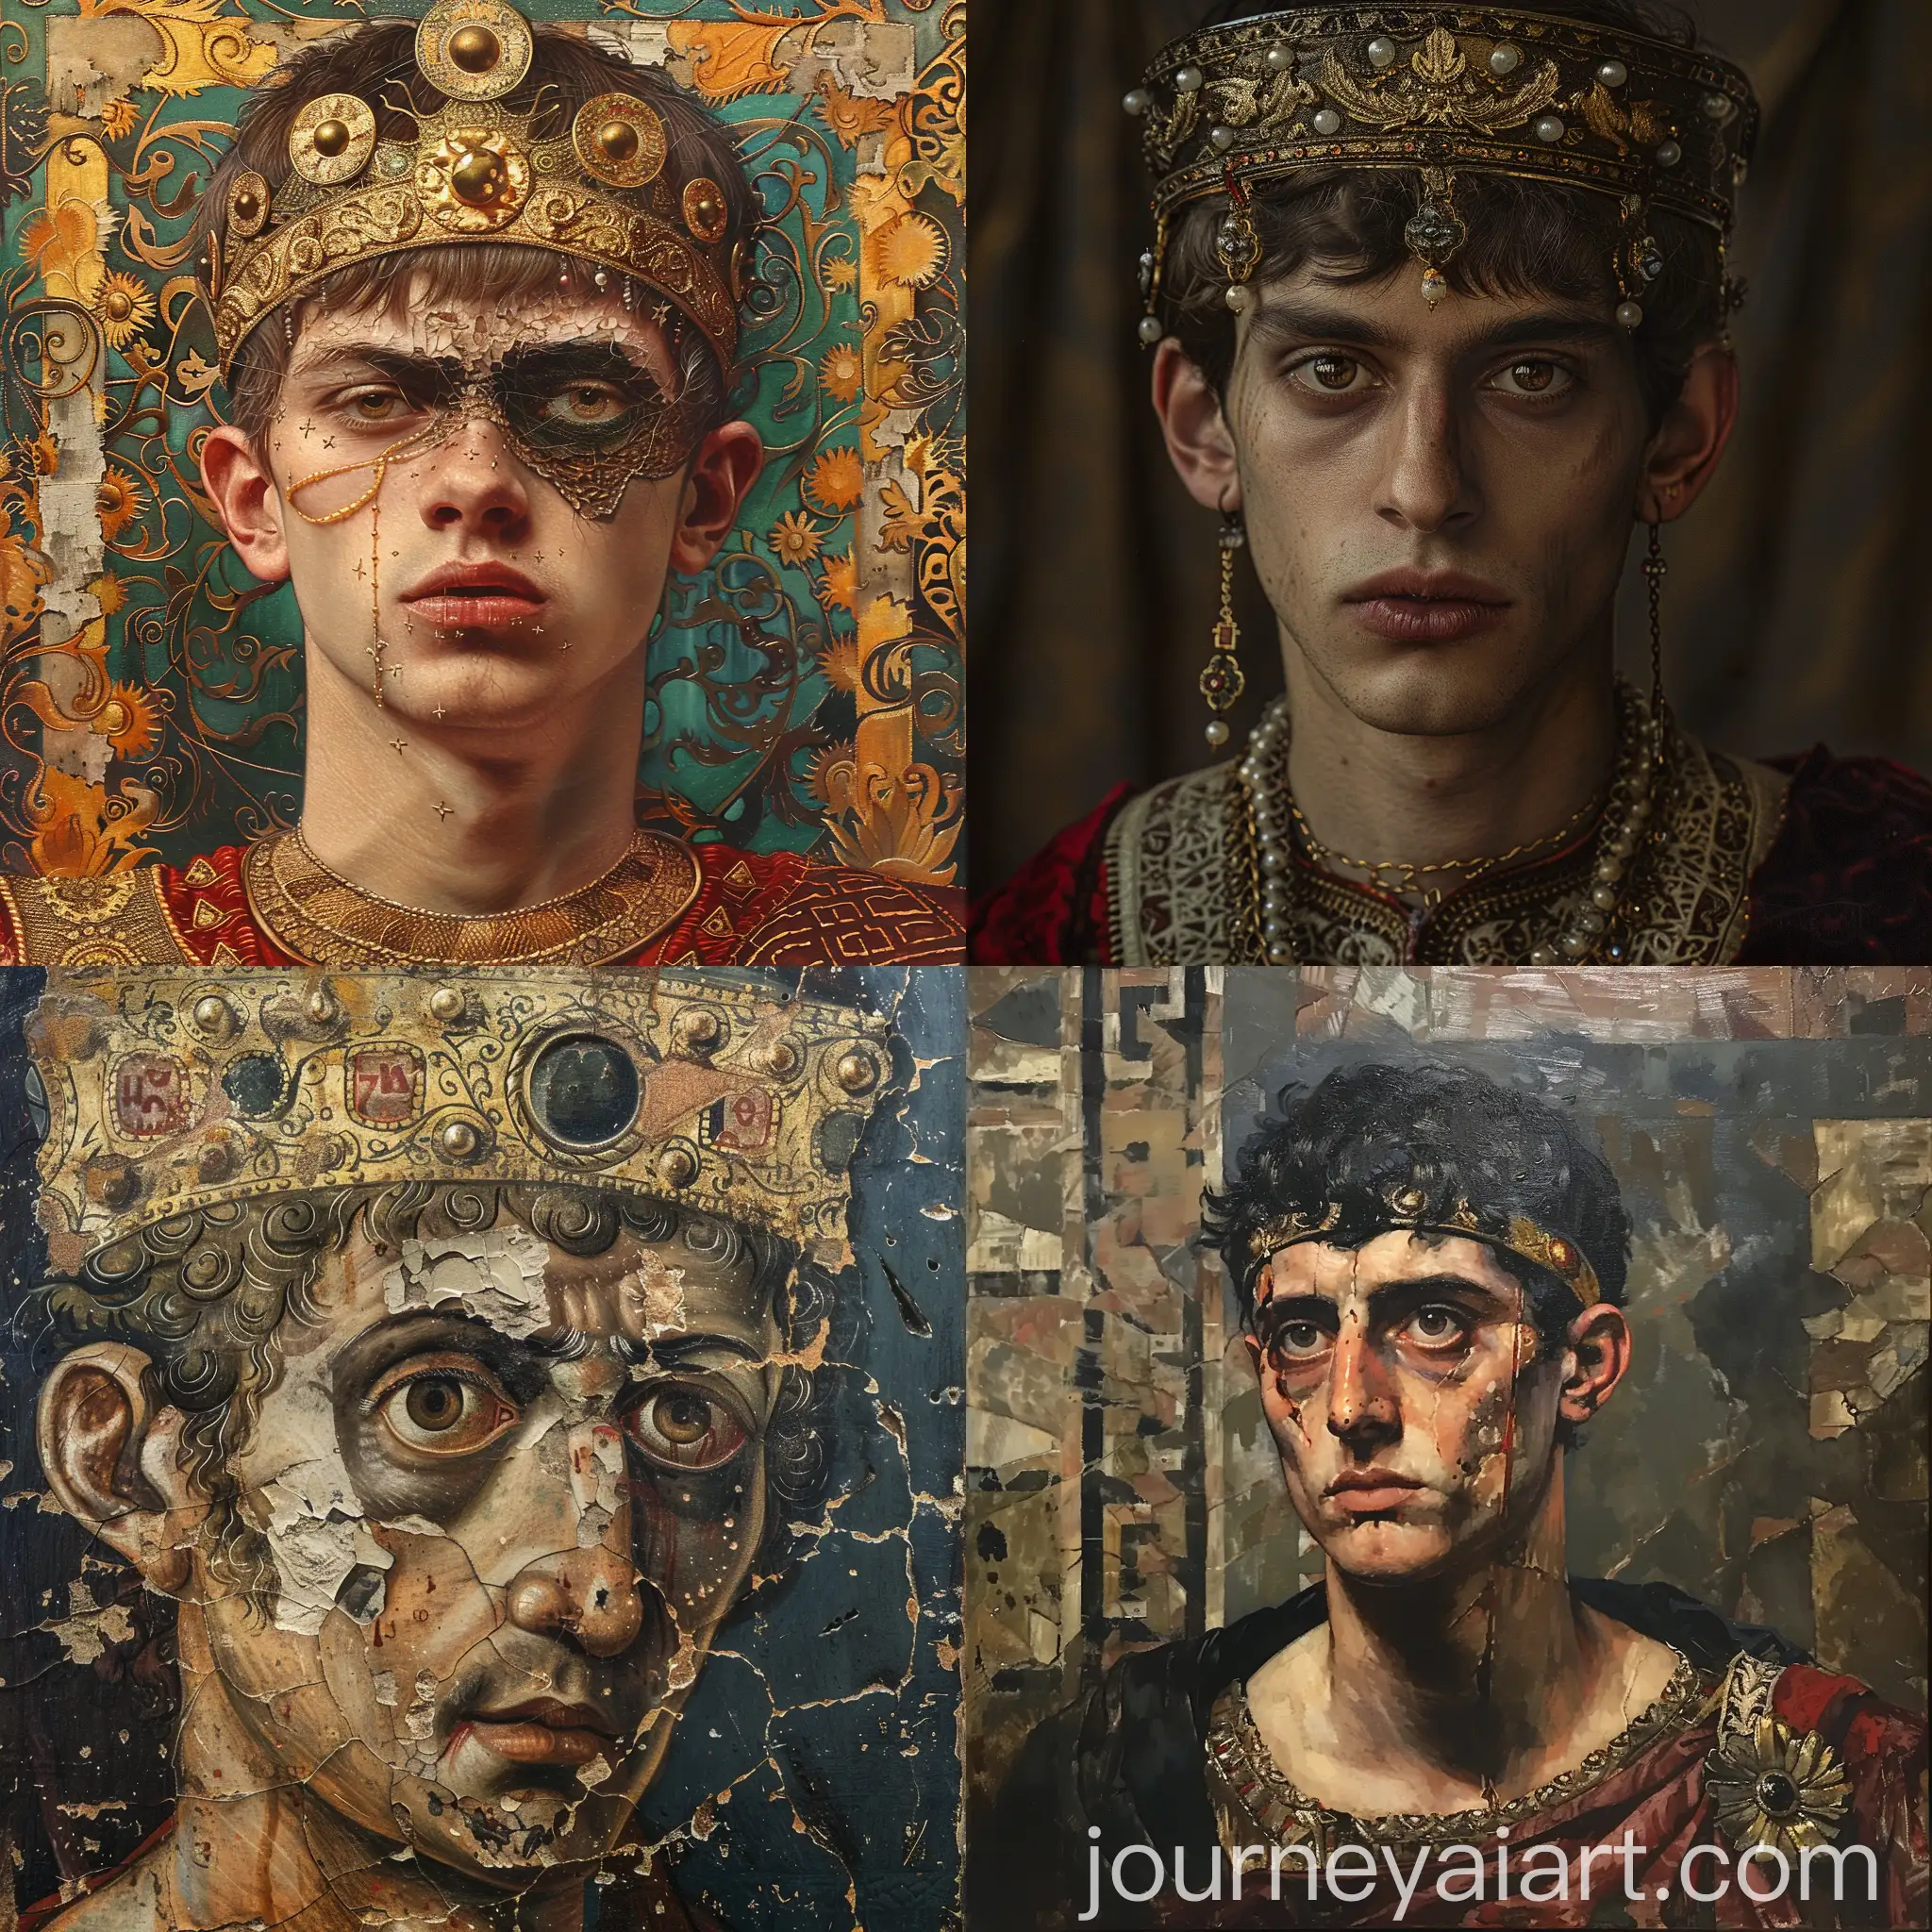 Byzantine-Prince-Portrait-with-Mysterious-Eyes-Hollow